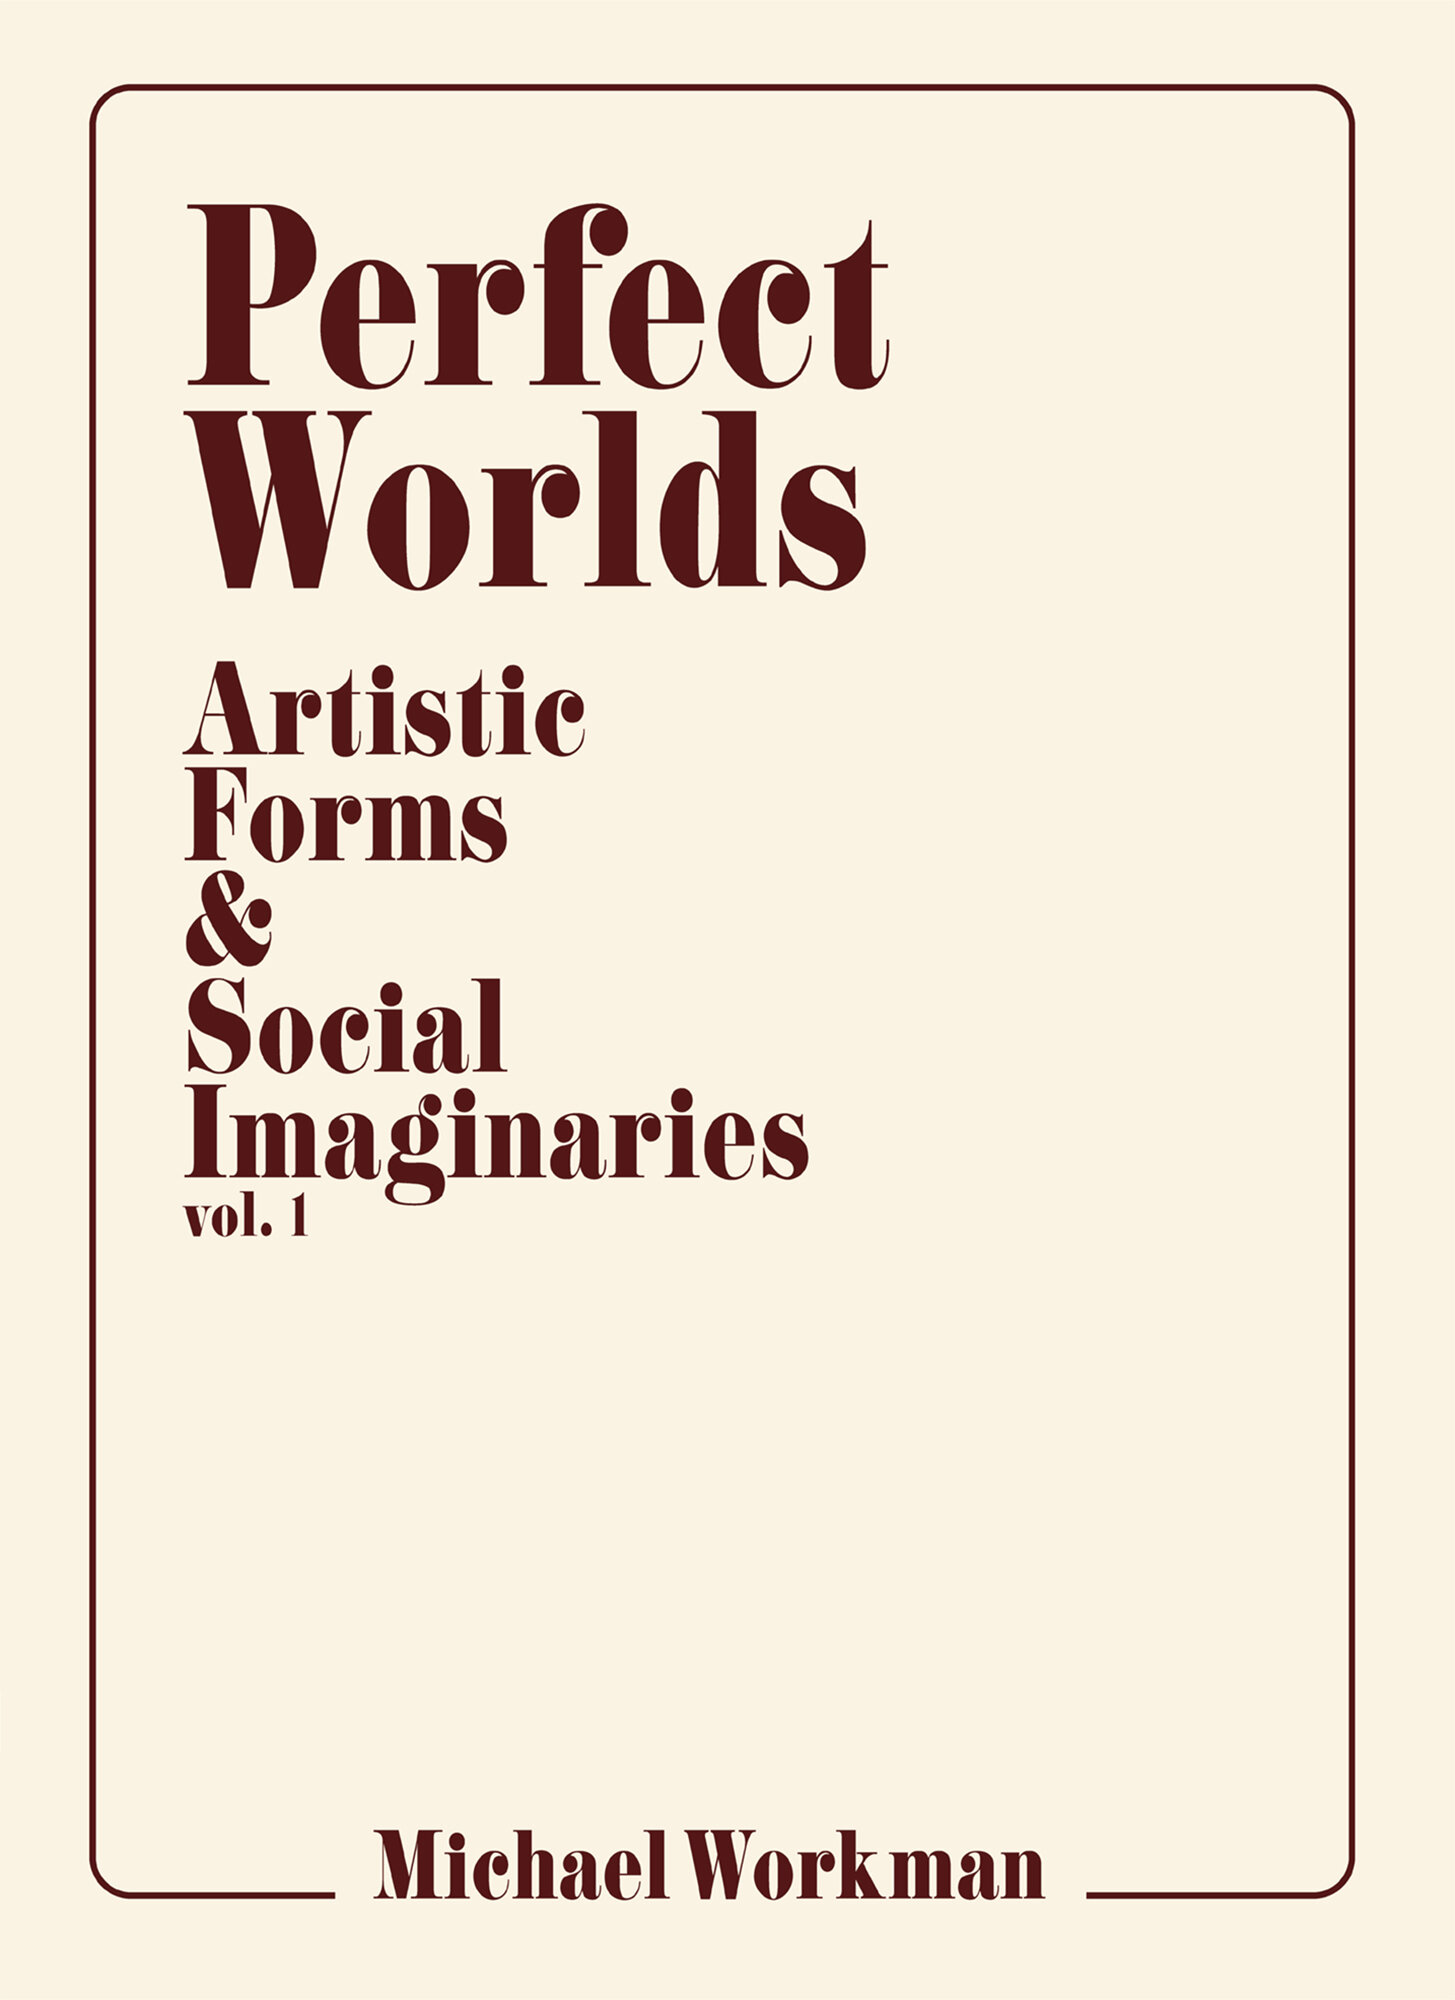  front cover design.  Perfect Worlds vol. 1 by Michael Workman. Published by StepSister Press.  